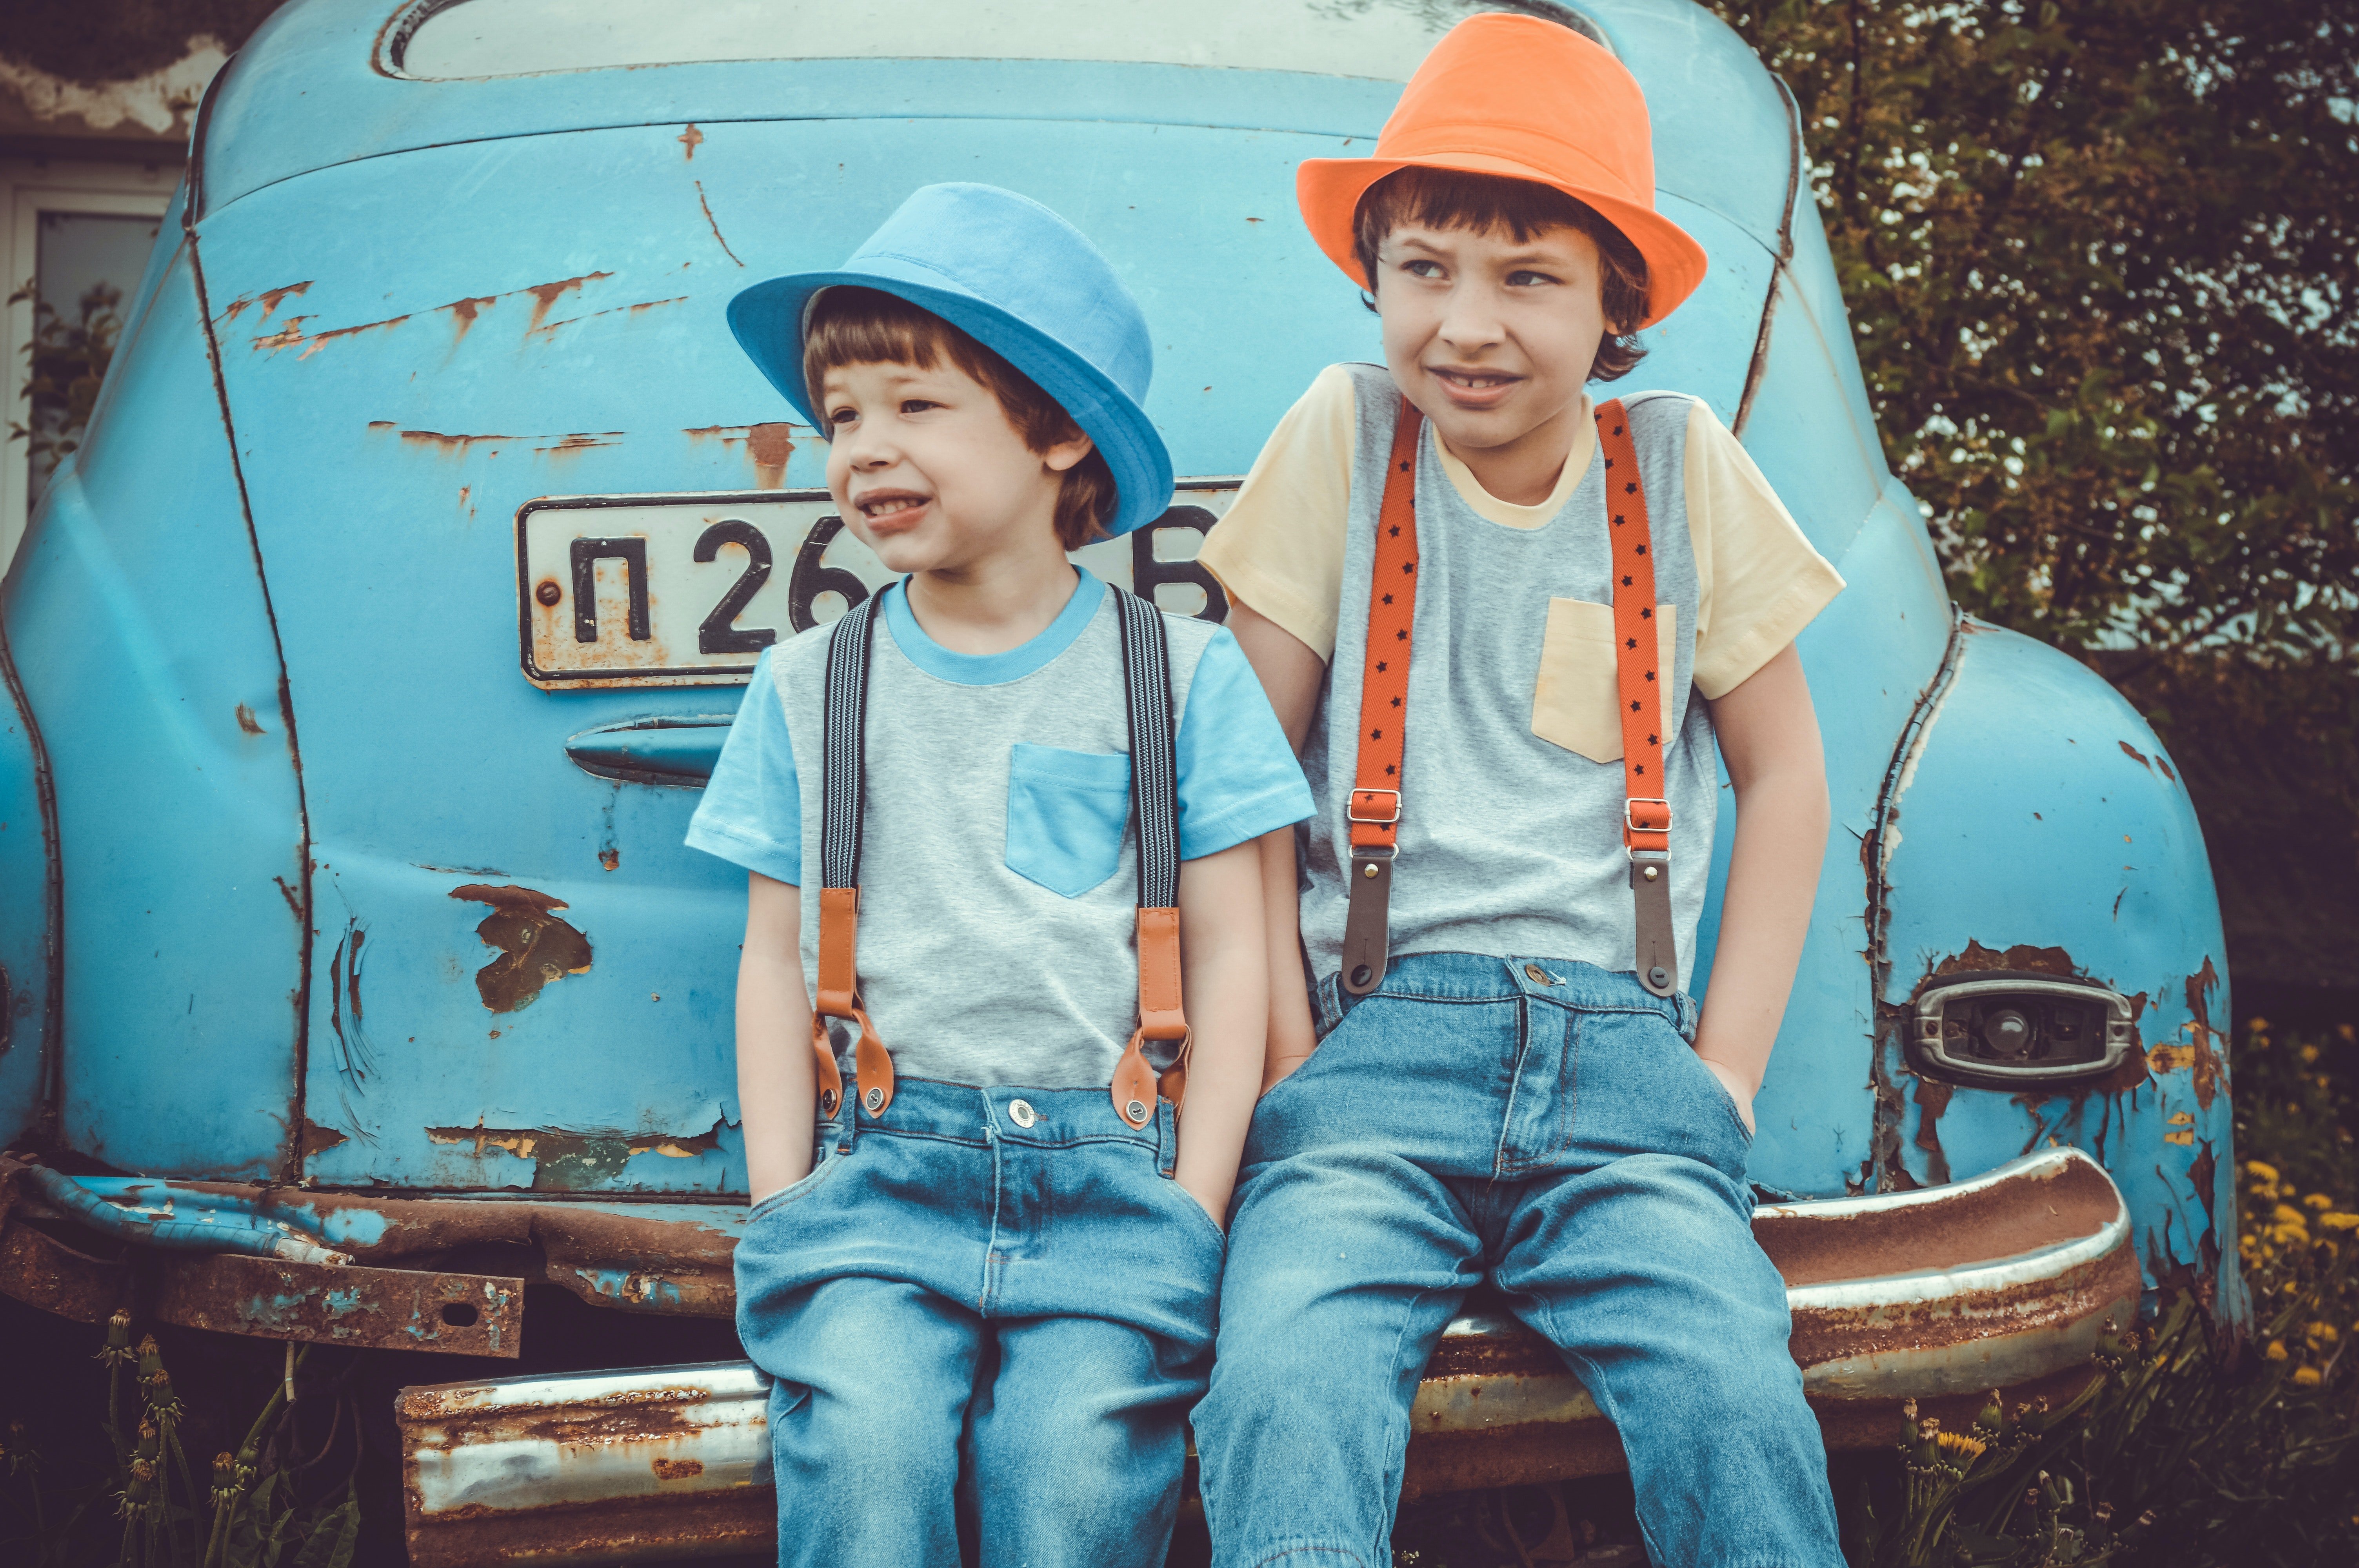 Two poor boys asked Mike and Steve for help. | Source: Pexels